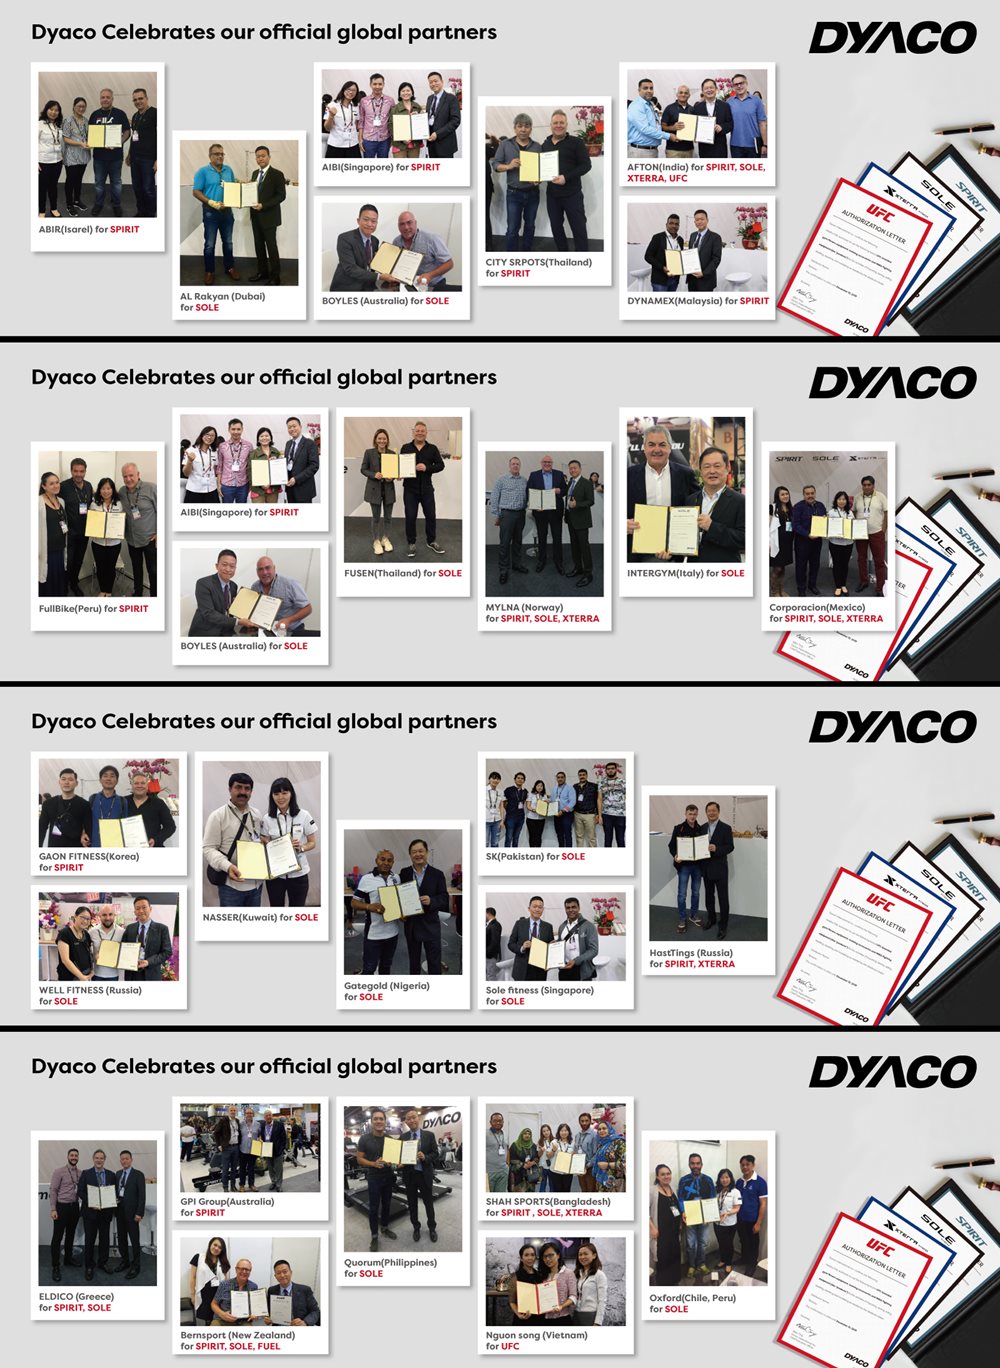 Dyaco Celebrates and Congratulates their Official Global Partners.